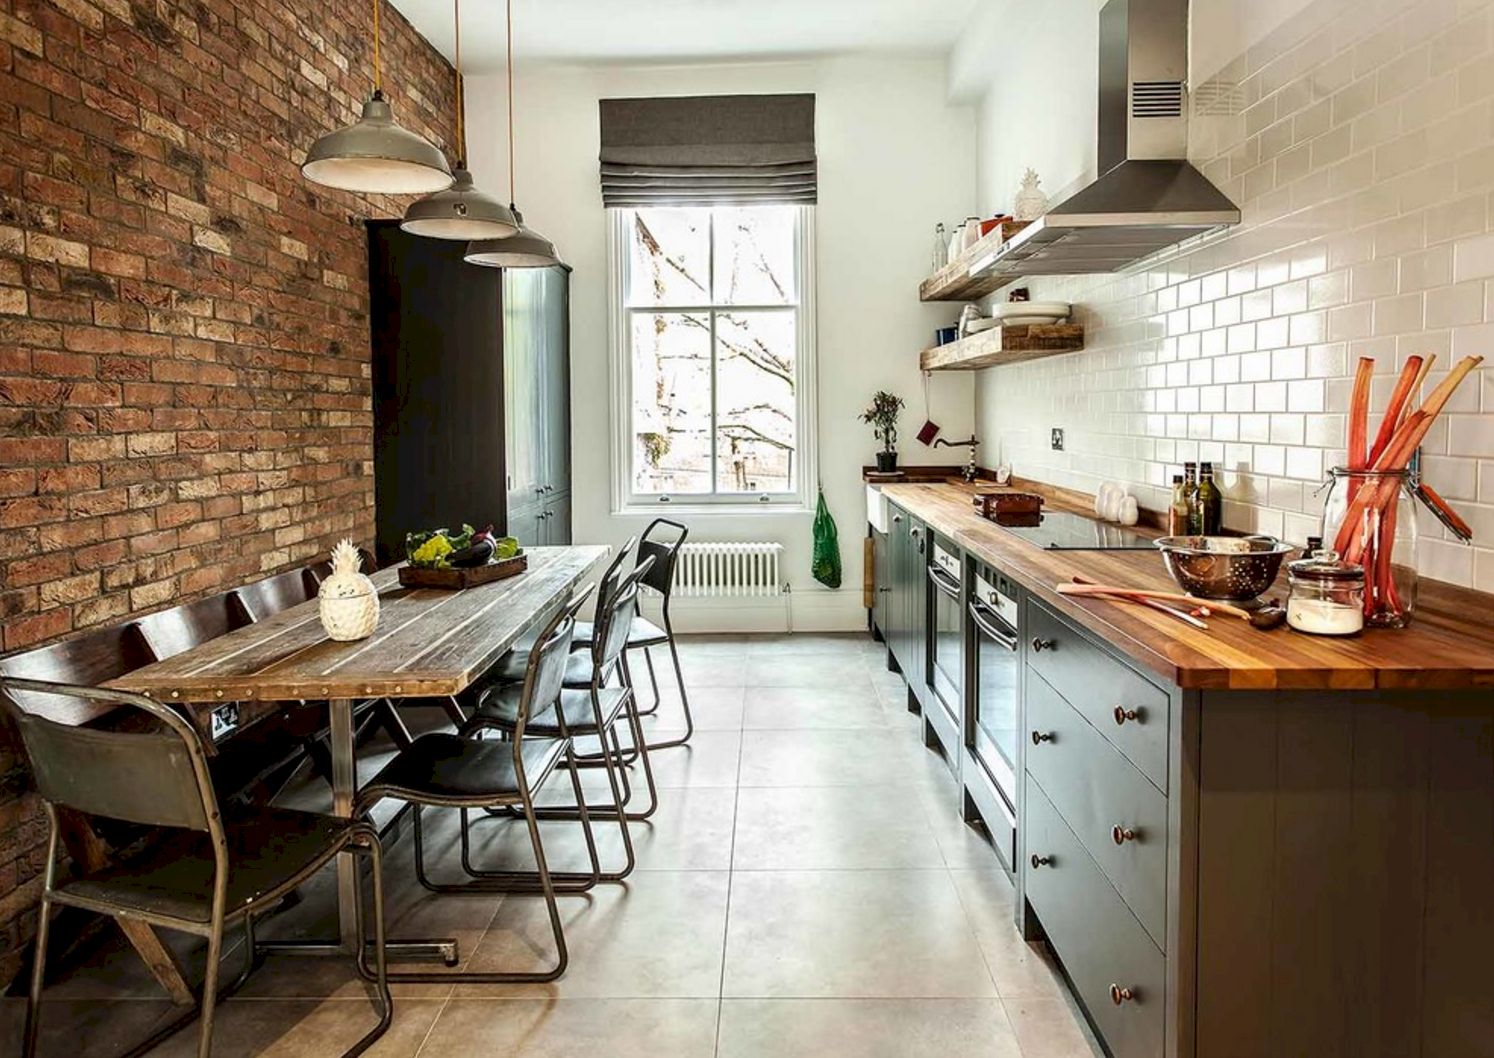 loft style in the kitchen